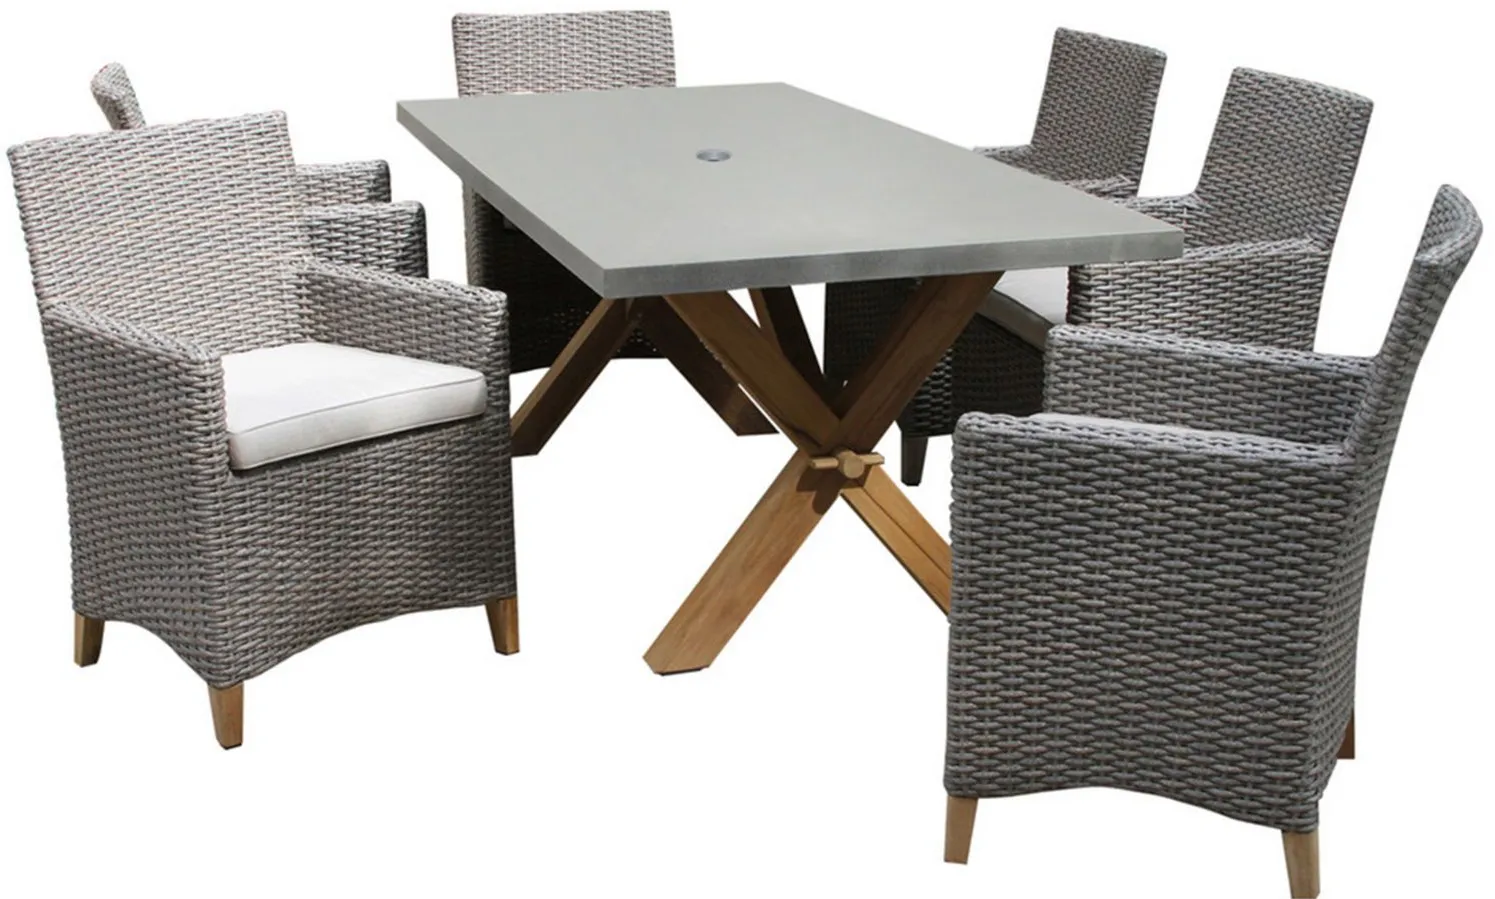 Nautical 7-pc. Teak and Wicker Outdoor Trestle Dining Set in Natural/Navy by Outdoor Interiors